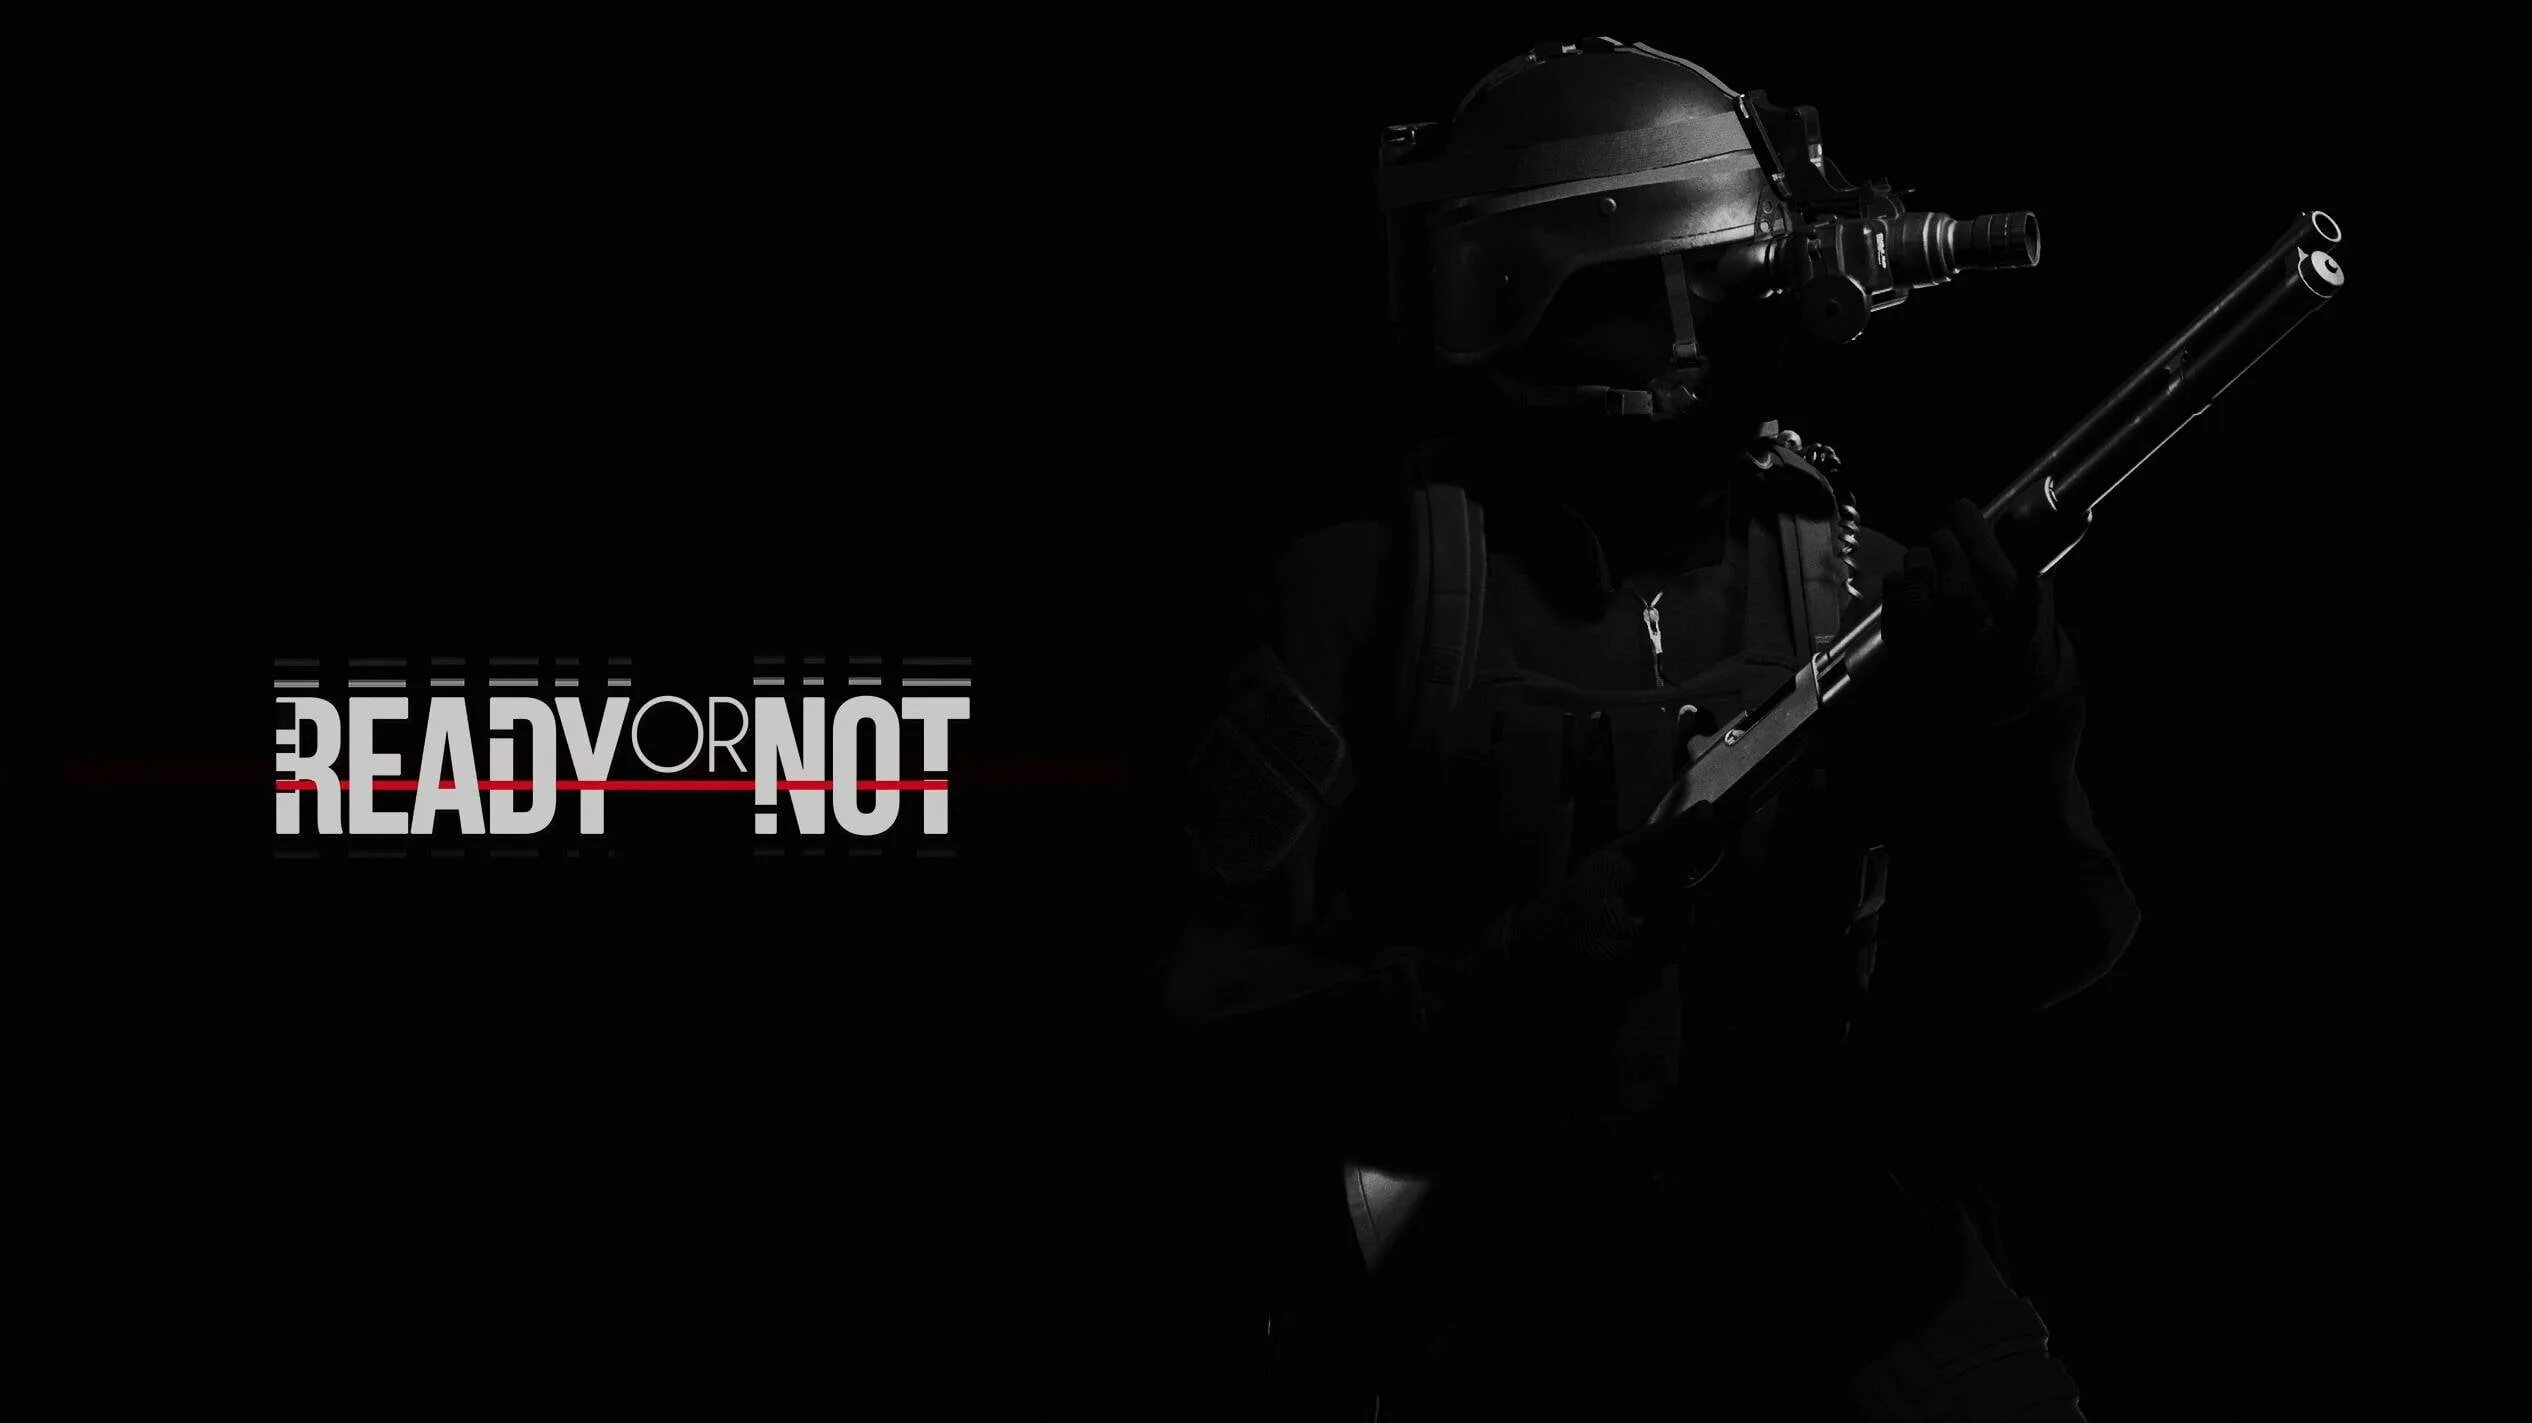 Ready or not фон. Ready or not игра. Ready or not обои. SWAT обои. Ready or not карты